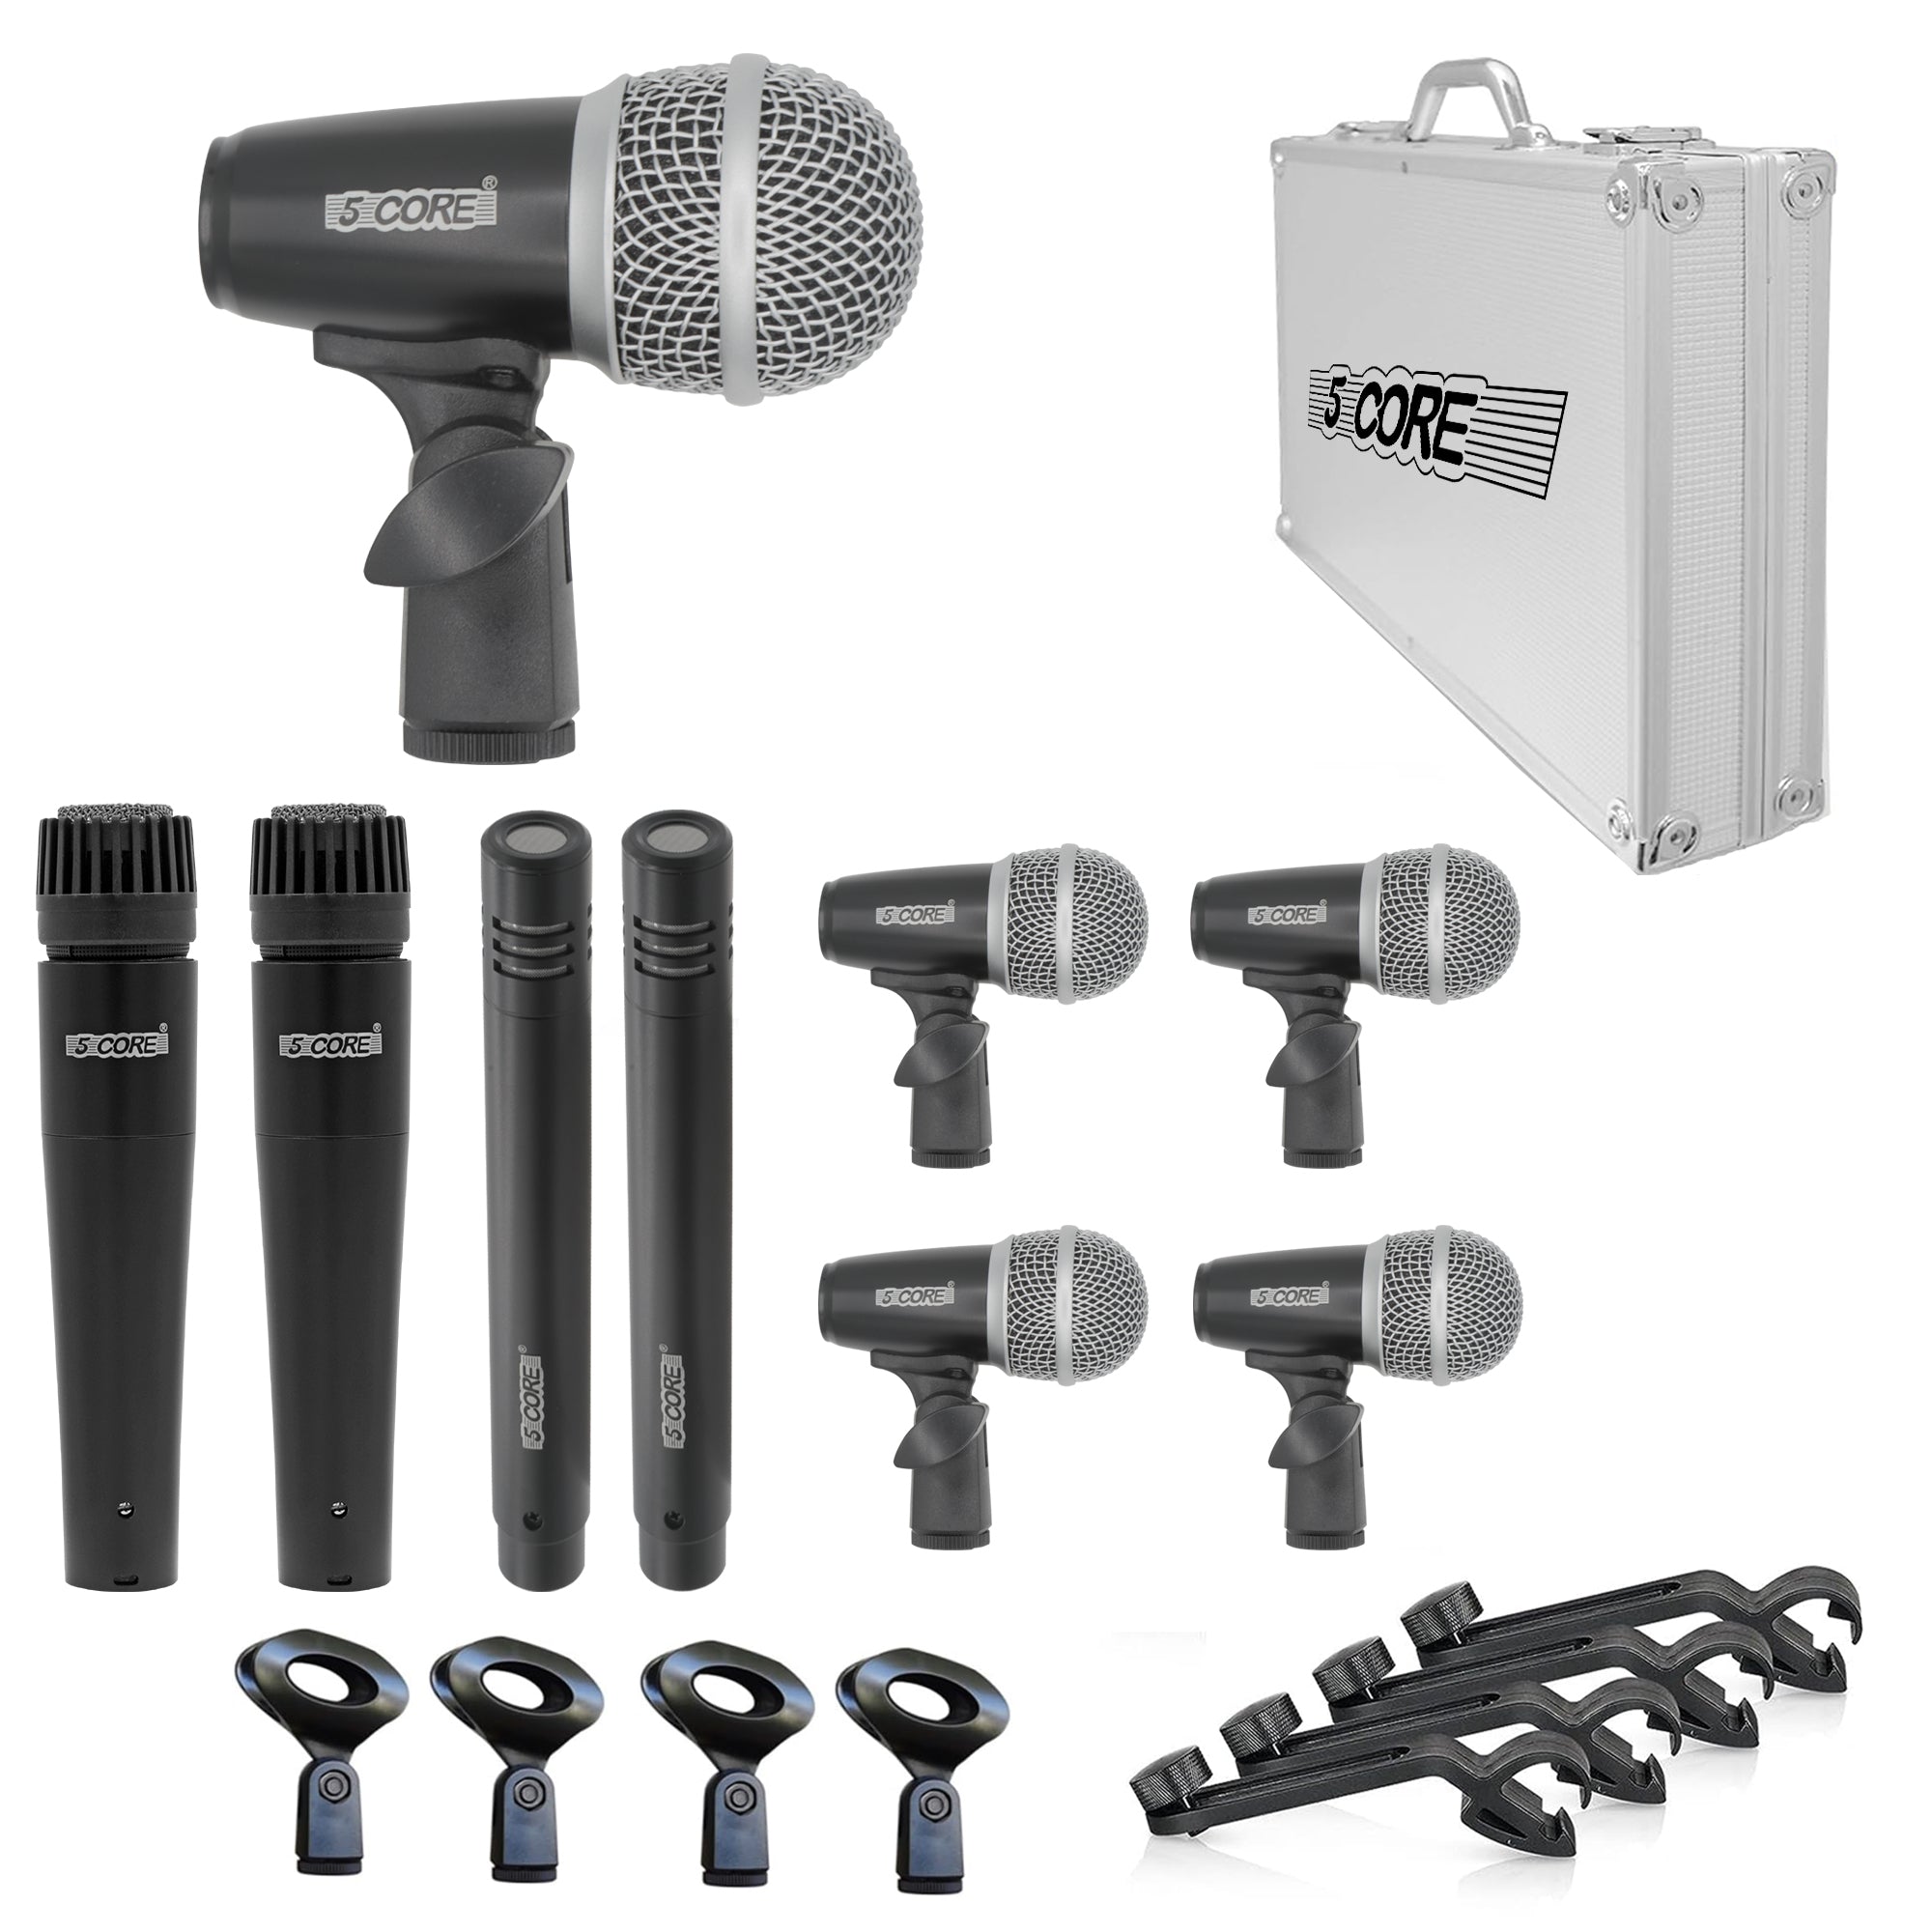 5 Core 9 Piece Drum Microphone Kit Grey• Wired Dynamic XLR Mics Kick Bass Tom Snare and Cymbals Set